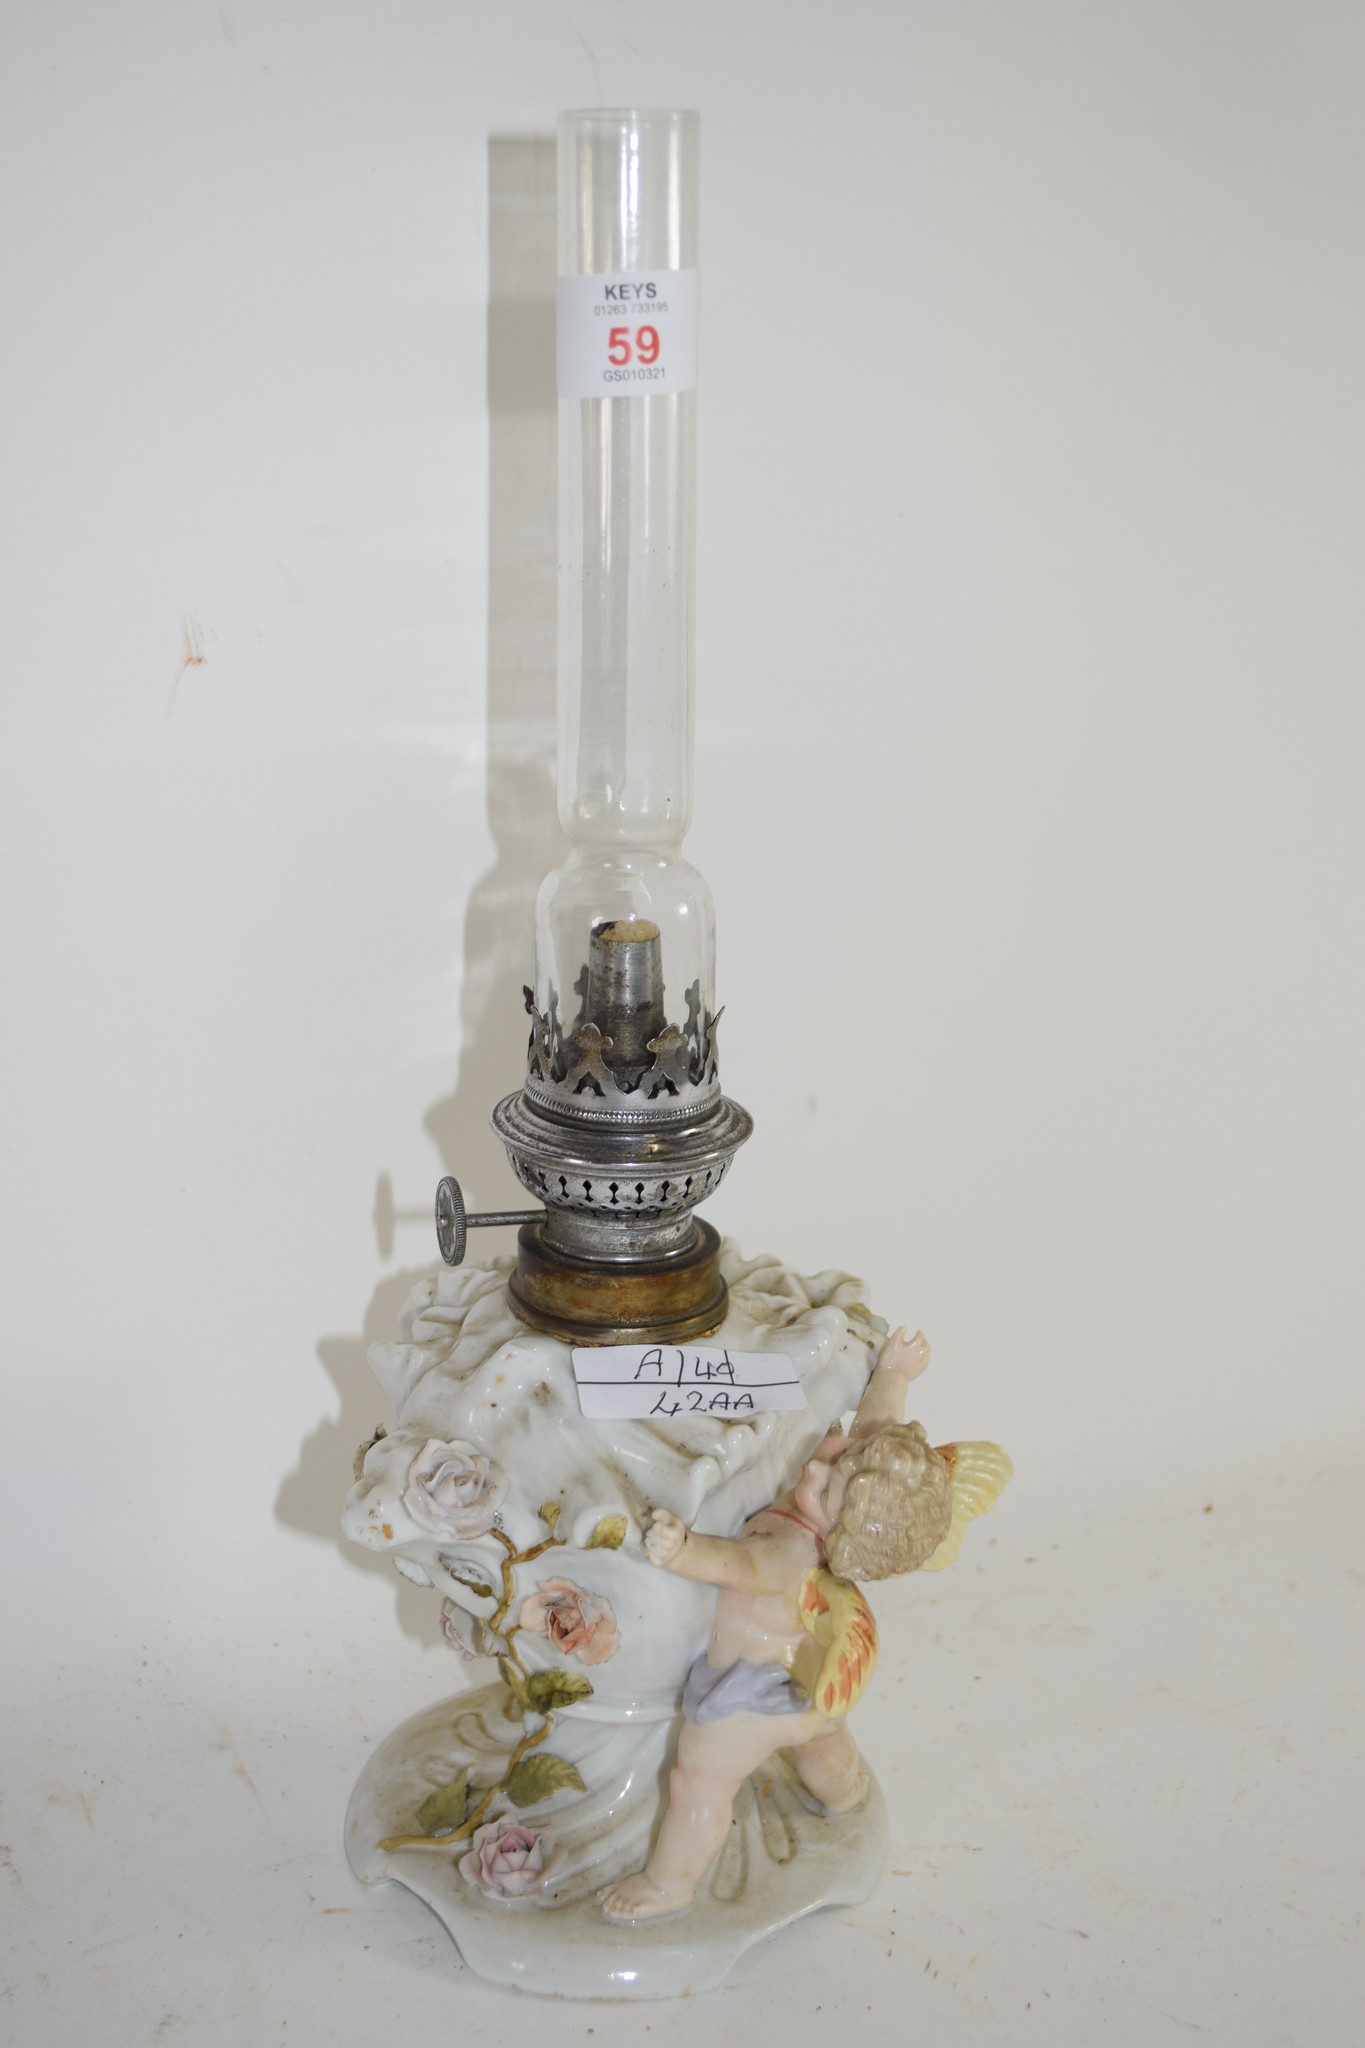 SMALL CERAMIC TABLE LAMP WITH GLASS CHIMNEY - Image 2 of 2